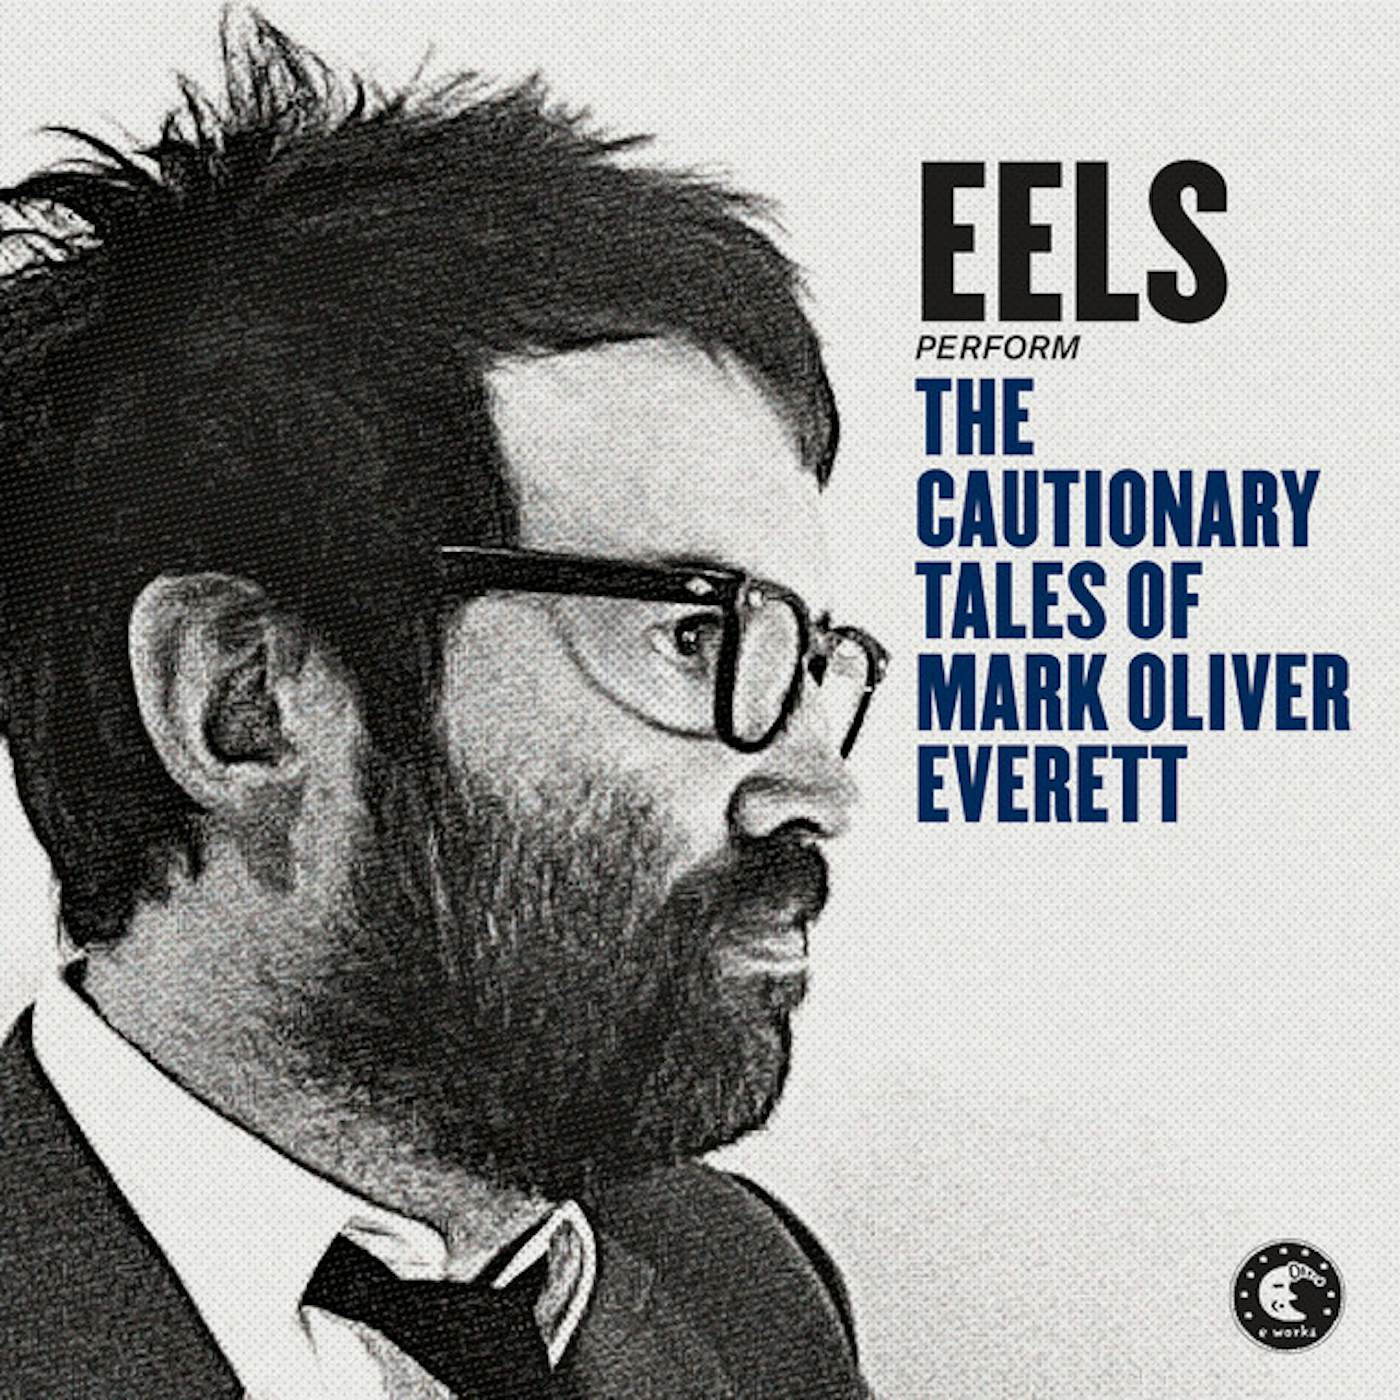 Eels CAUTIONARY TALES OF MARK OLIVER EVERETT (DELUXE) CD